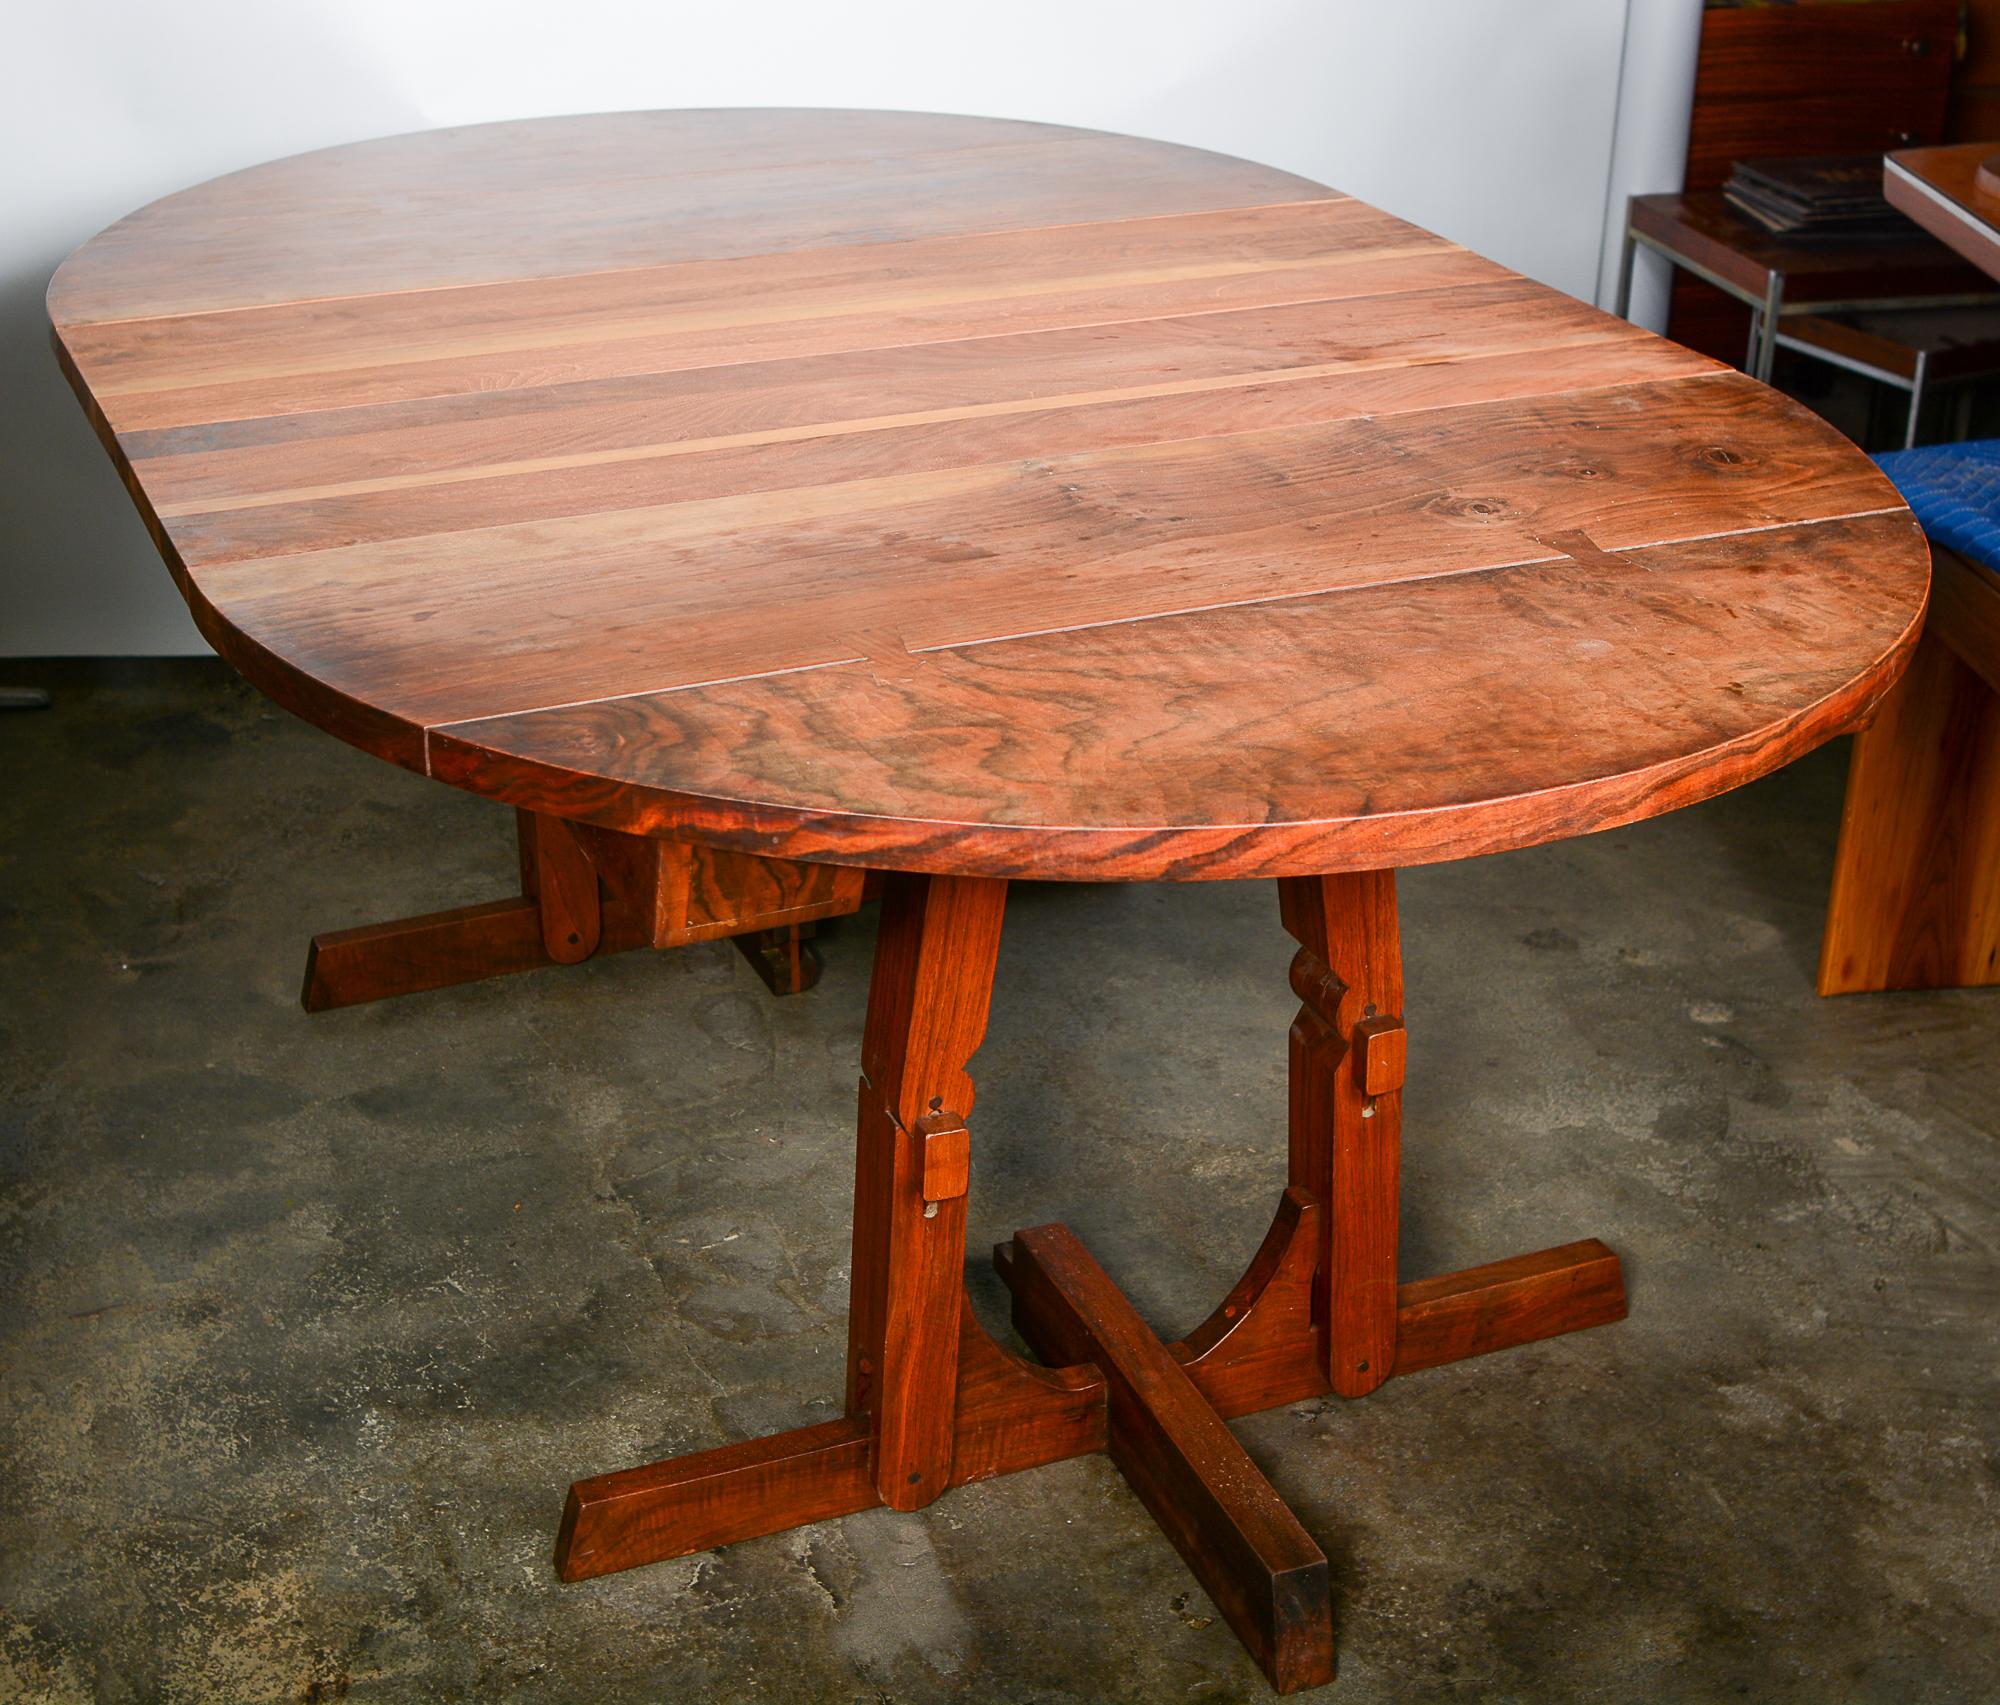 Walnut Dining Table with Four Leaves by Designer and Craftsman Morris Sheppard For Sale 2